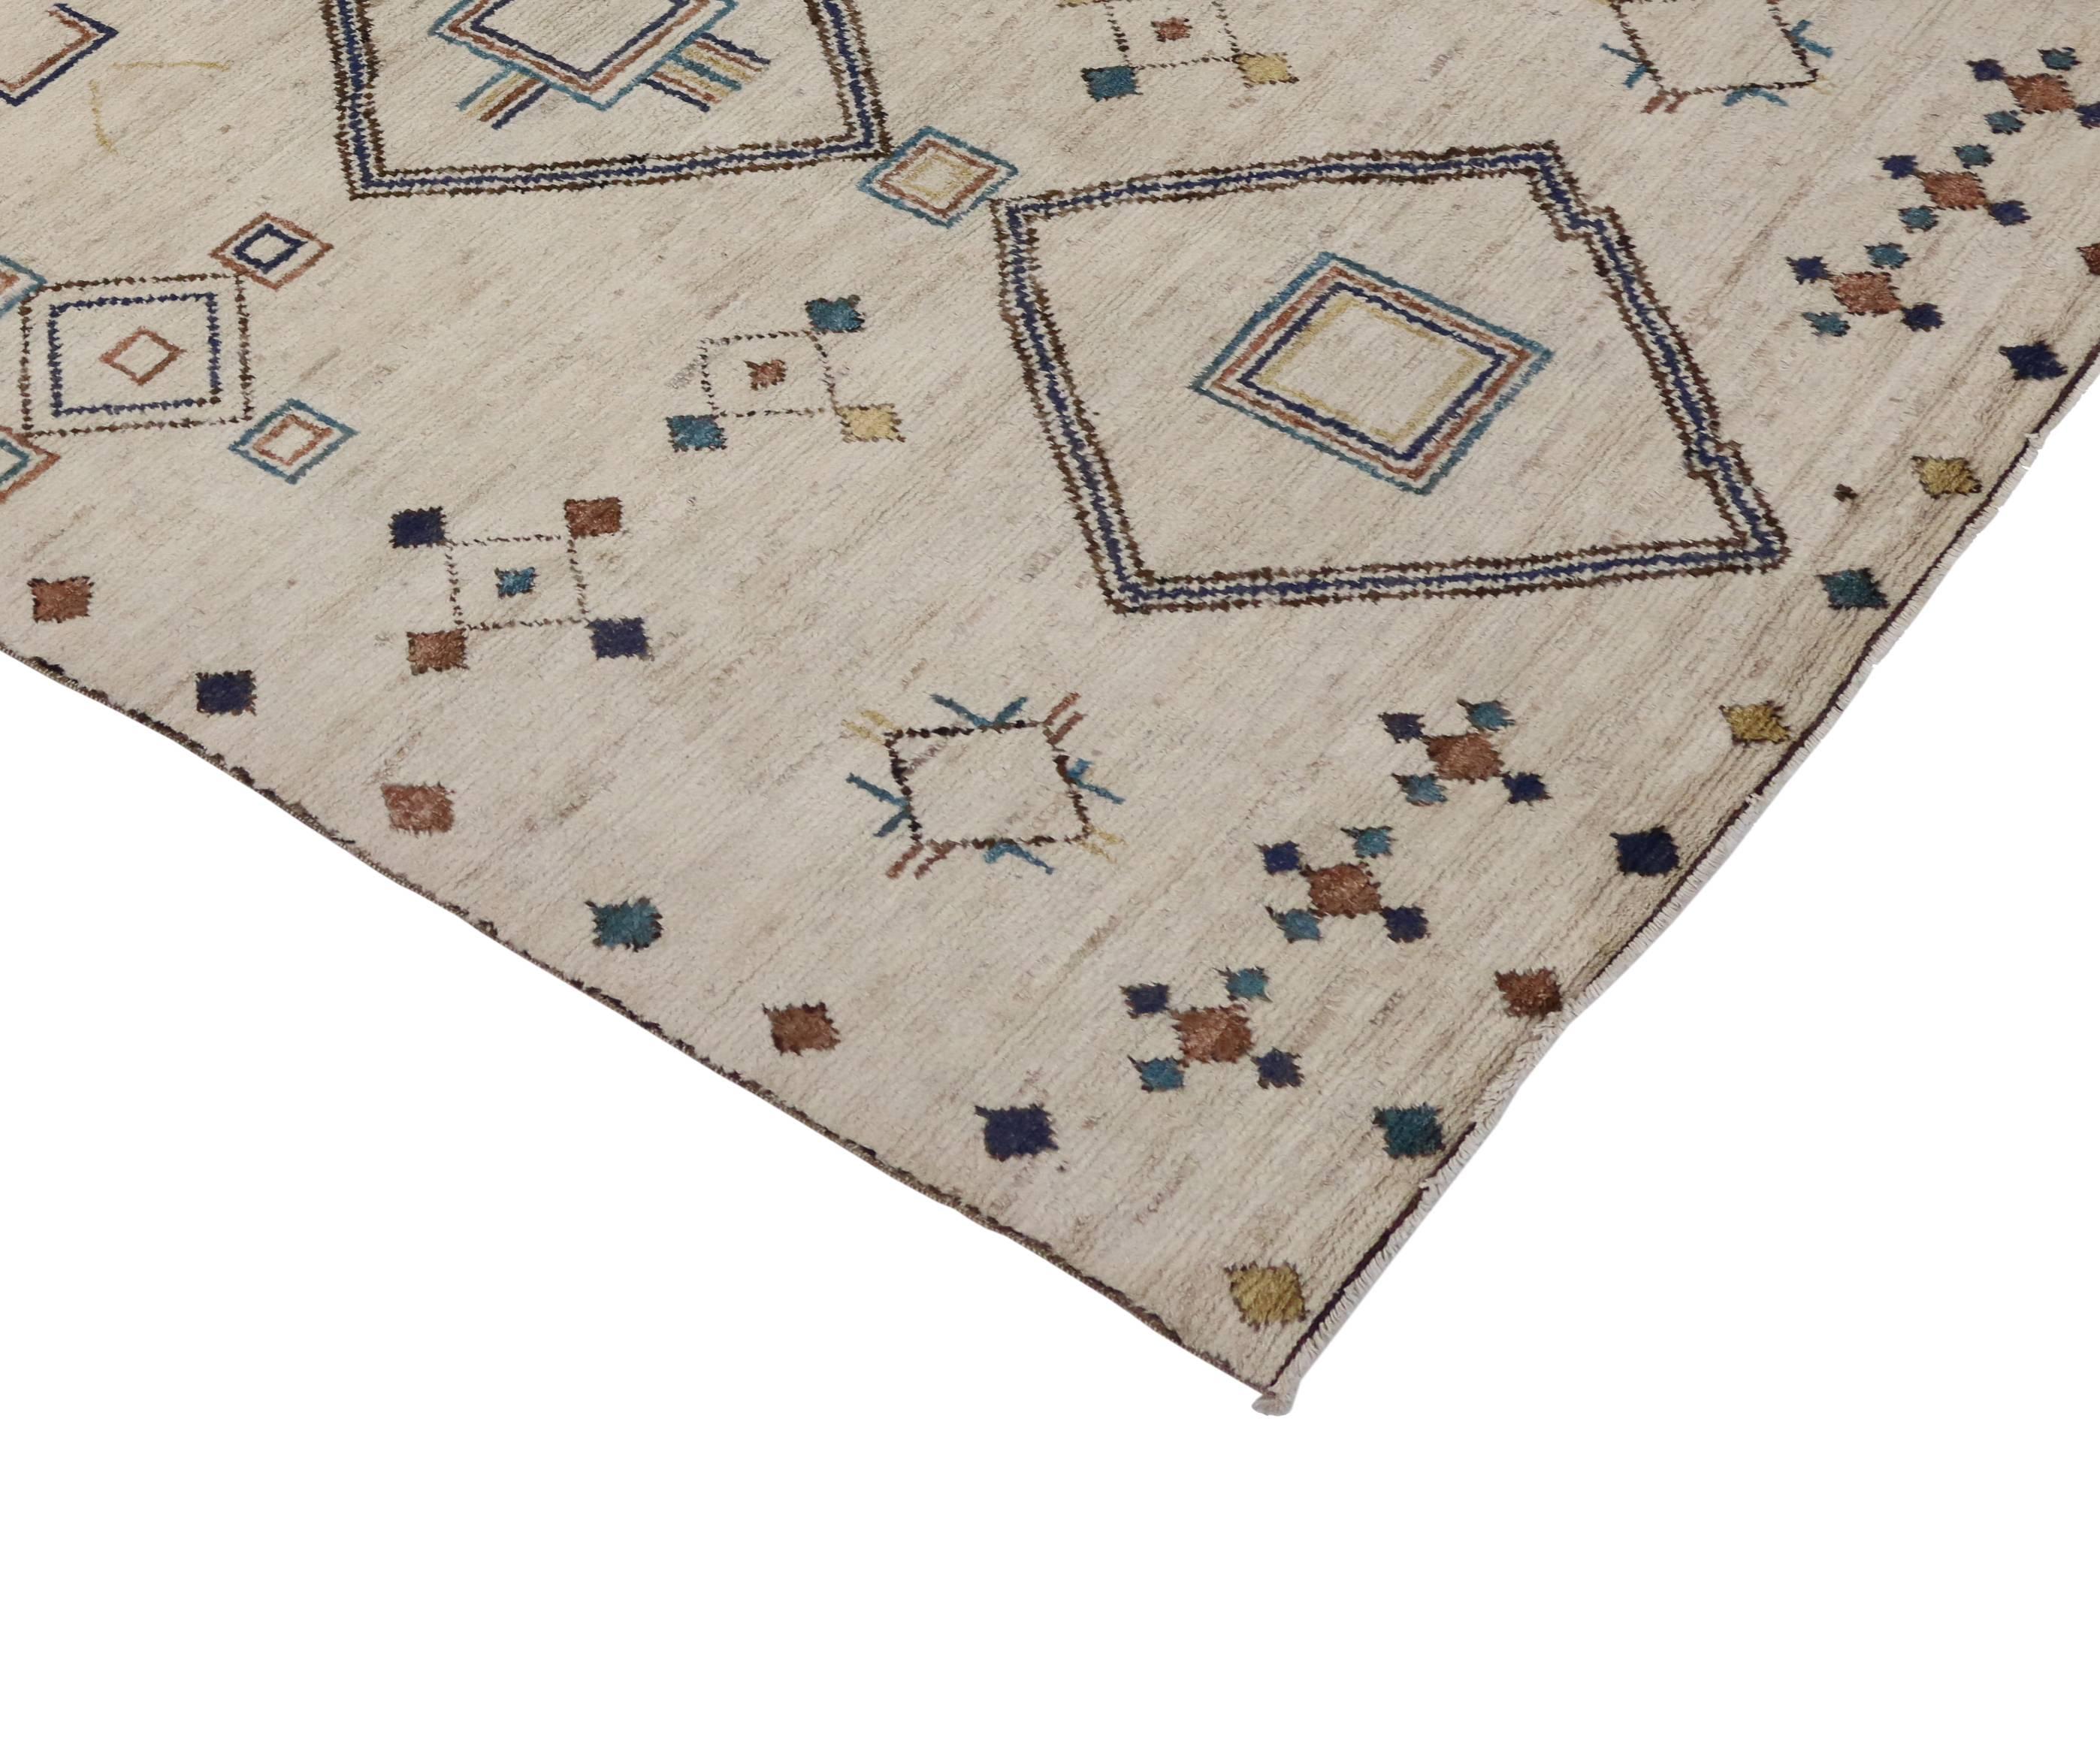 80202 Contemporary Moroccan Style Area Rug with Modern Tribal Design. This Moroccan area rug harmonizes disparate elements, brings soothing serenity while adding texture and depth to your space. This is a fantastic example of a contemporary Moroccan